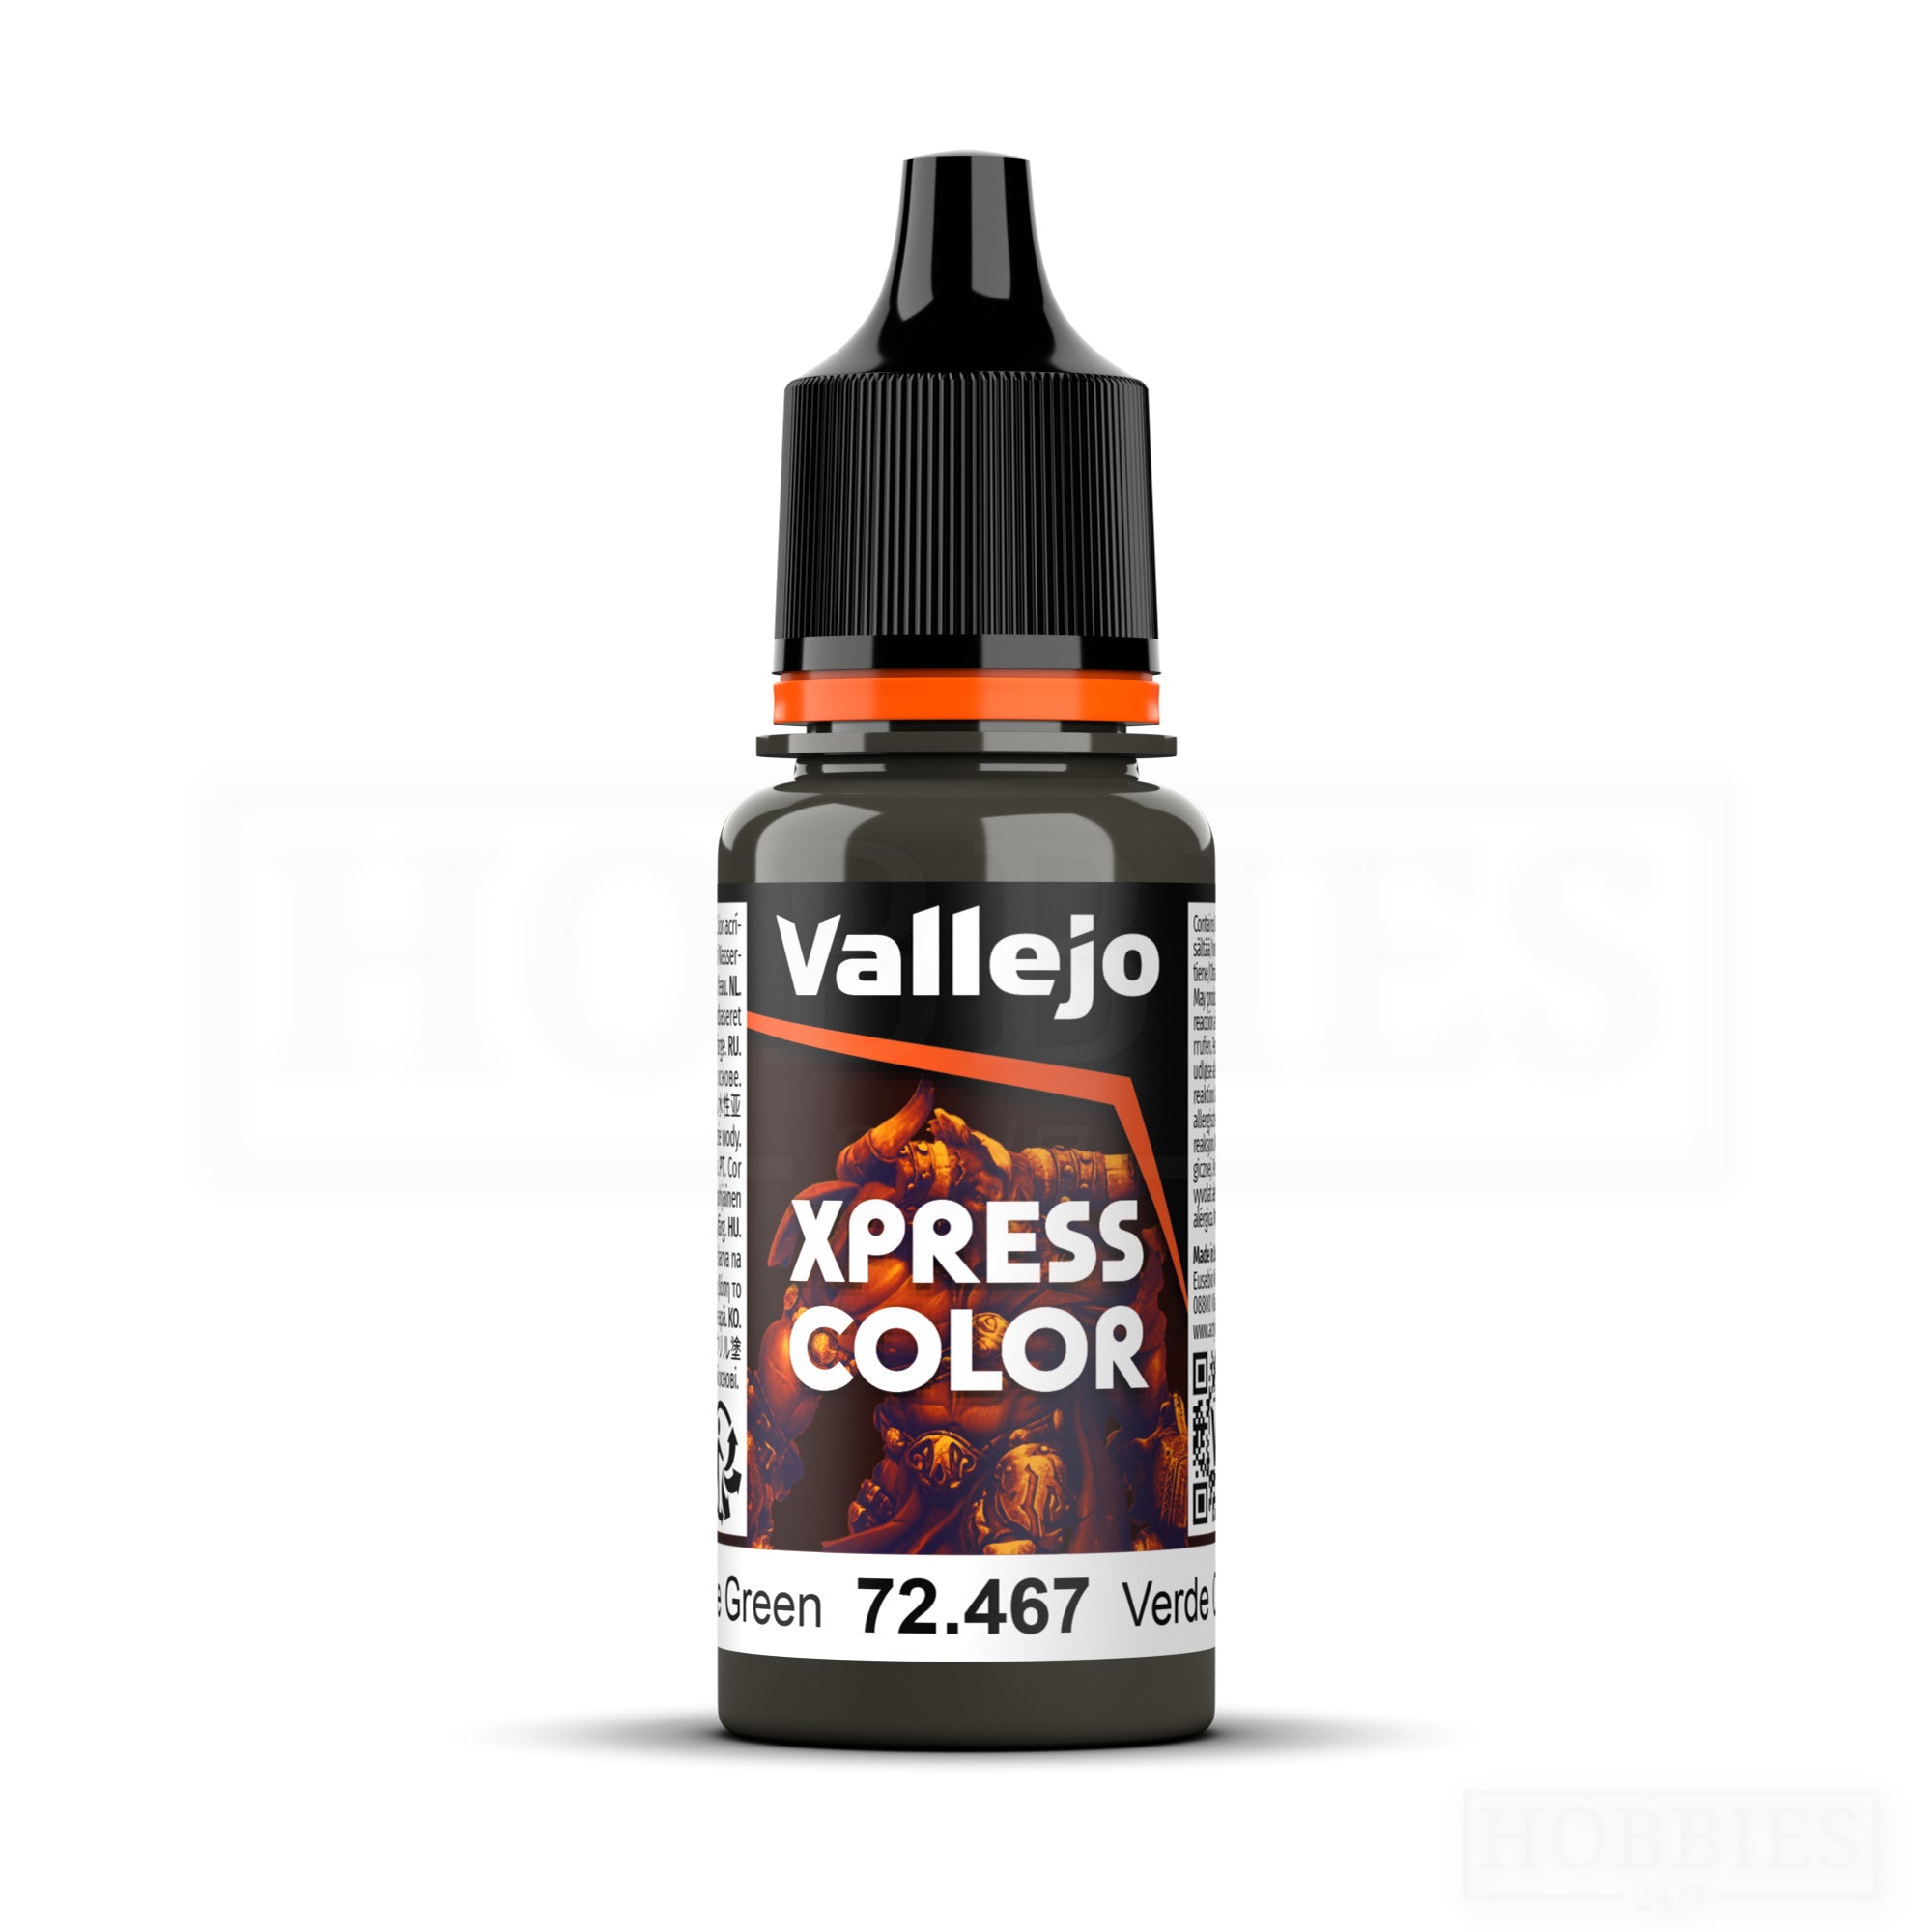 Vallejo Xpress Color Camouflage Green 18ml